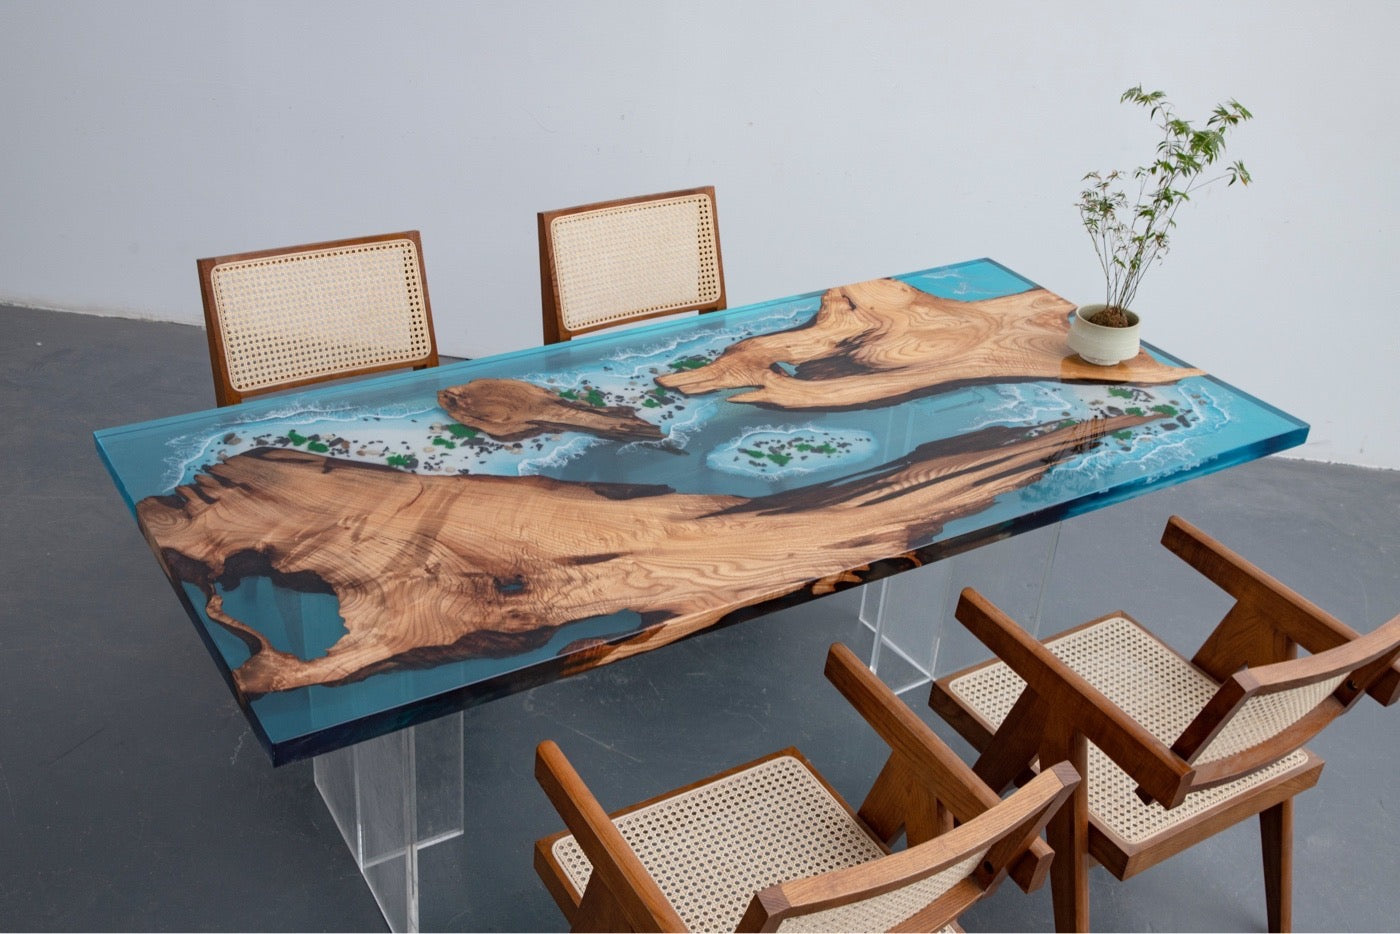 Camphor with light epoxy resin, Console table, Irregular shape epoxy resin table